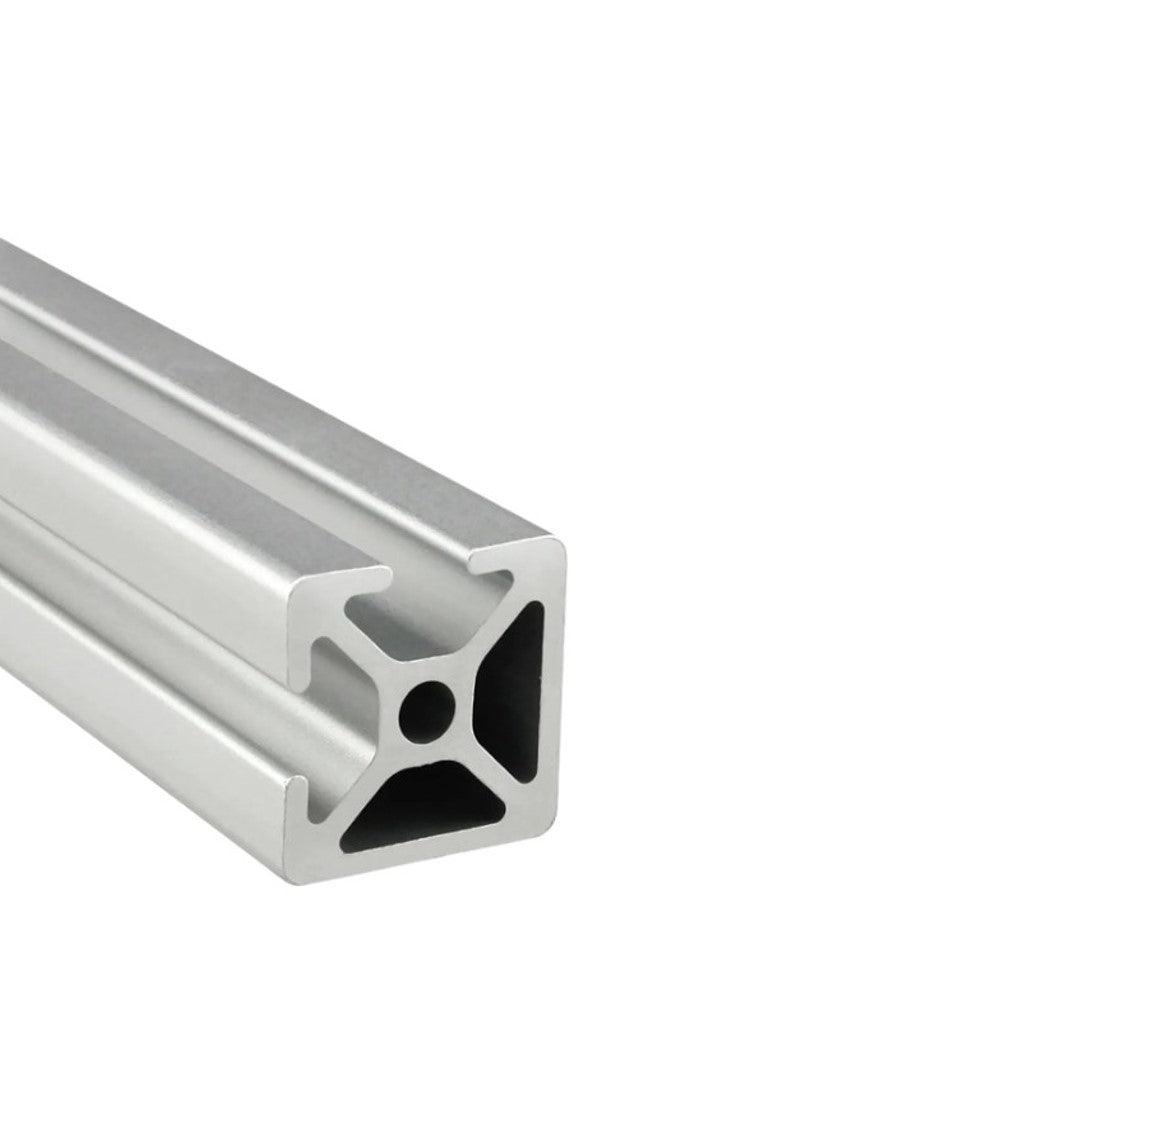 1" x 1" Smooth Bi-Slotted Aluminum Extrusion - 2ft Bar - Forces Inc